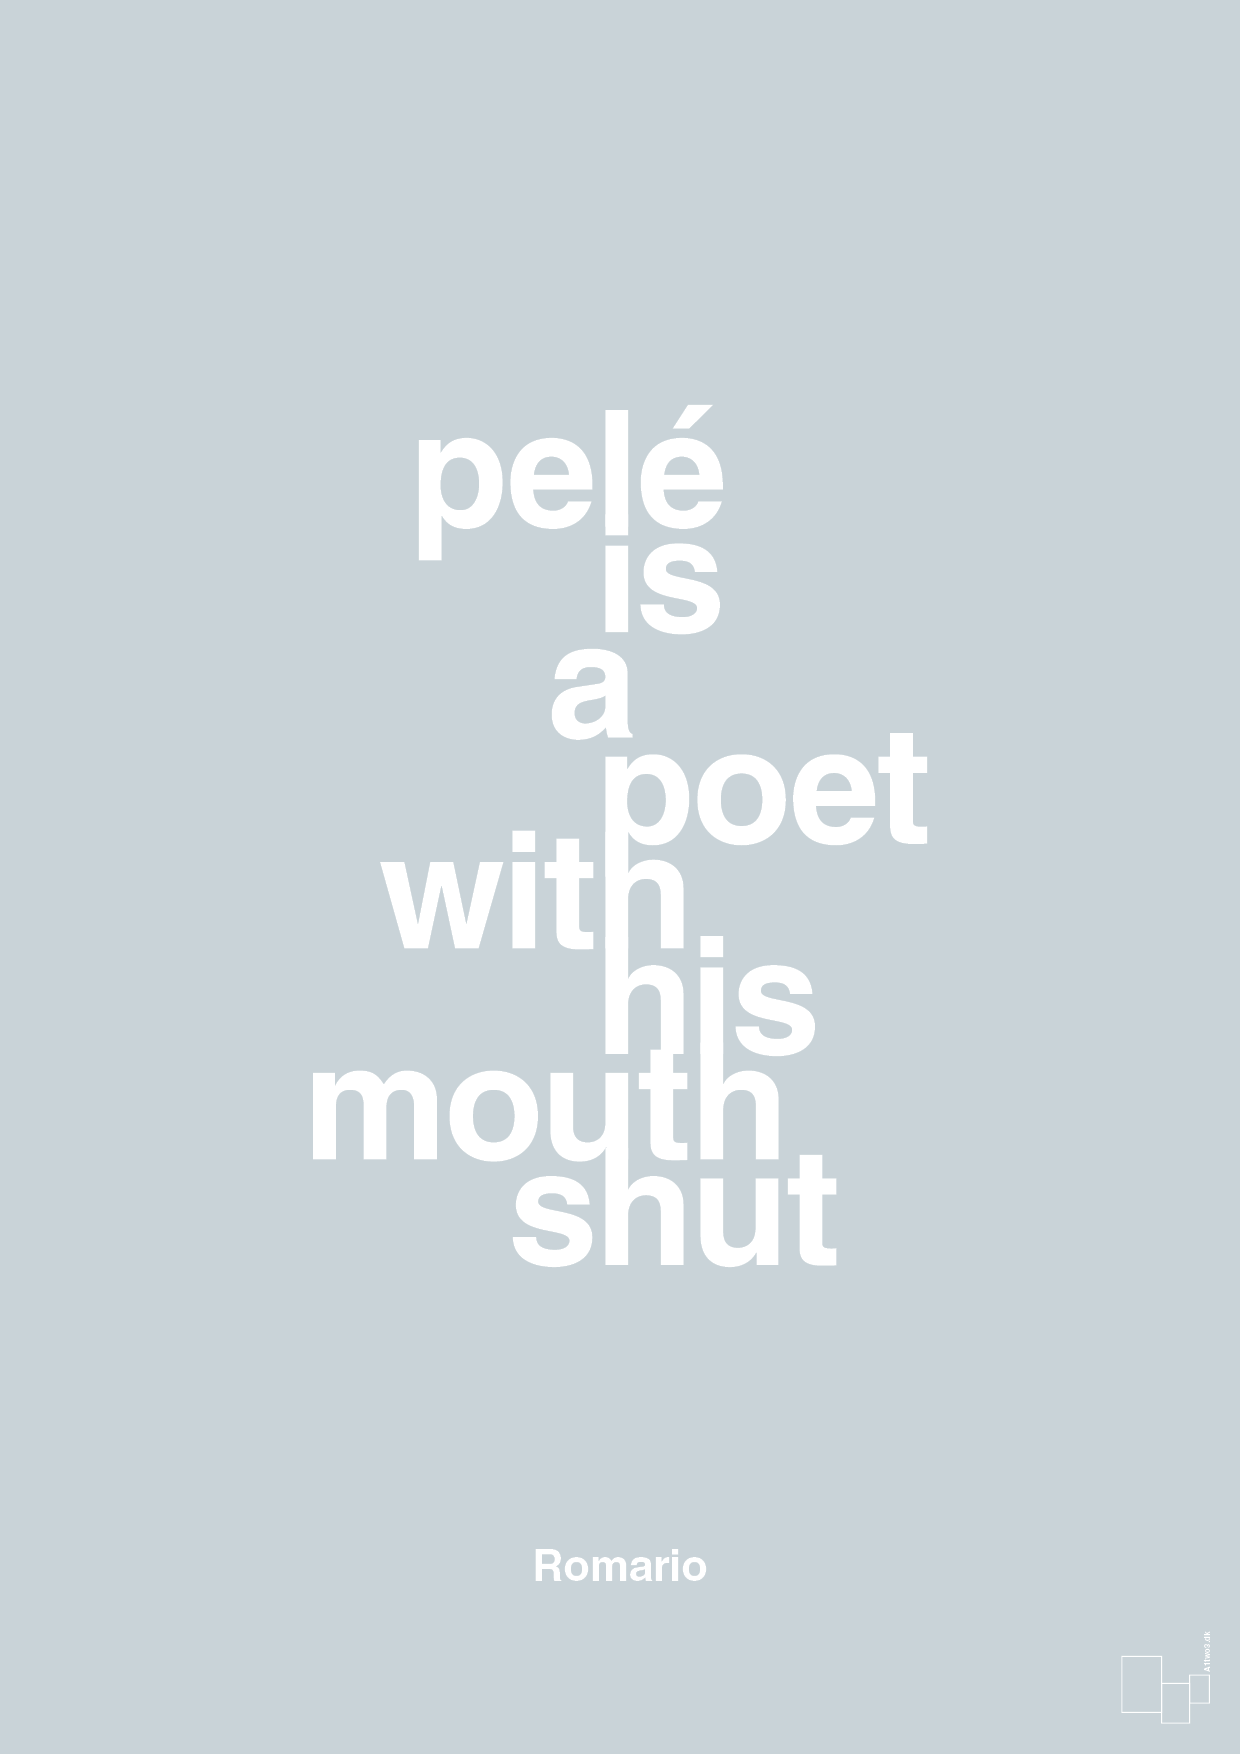 pelé is a poet with his mouth shut - Plakat med Citater i Light Drizzle